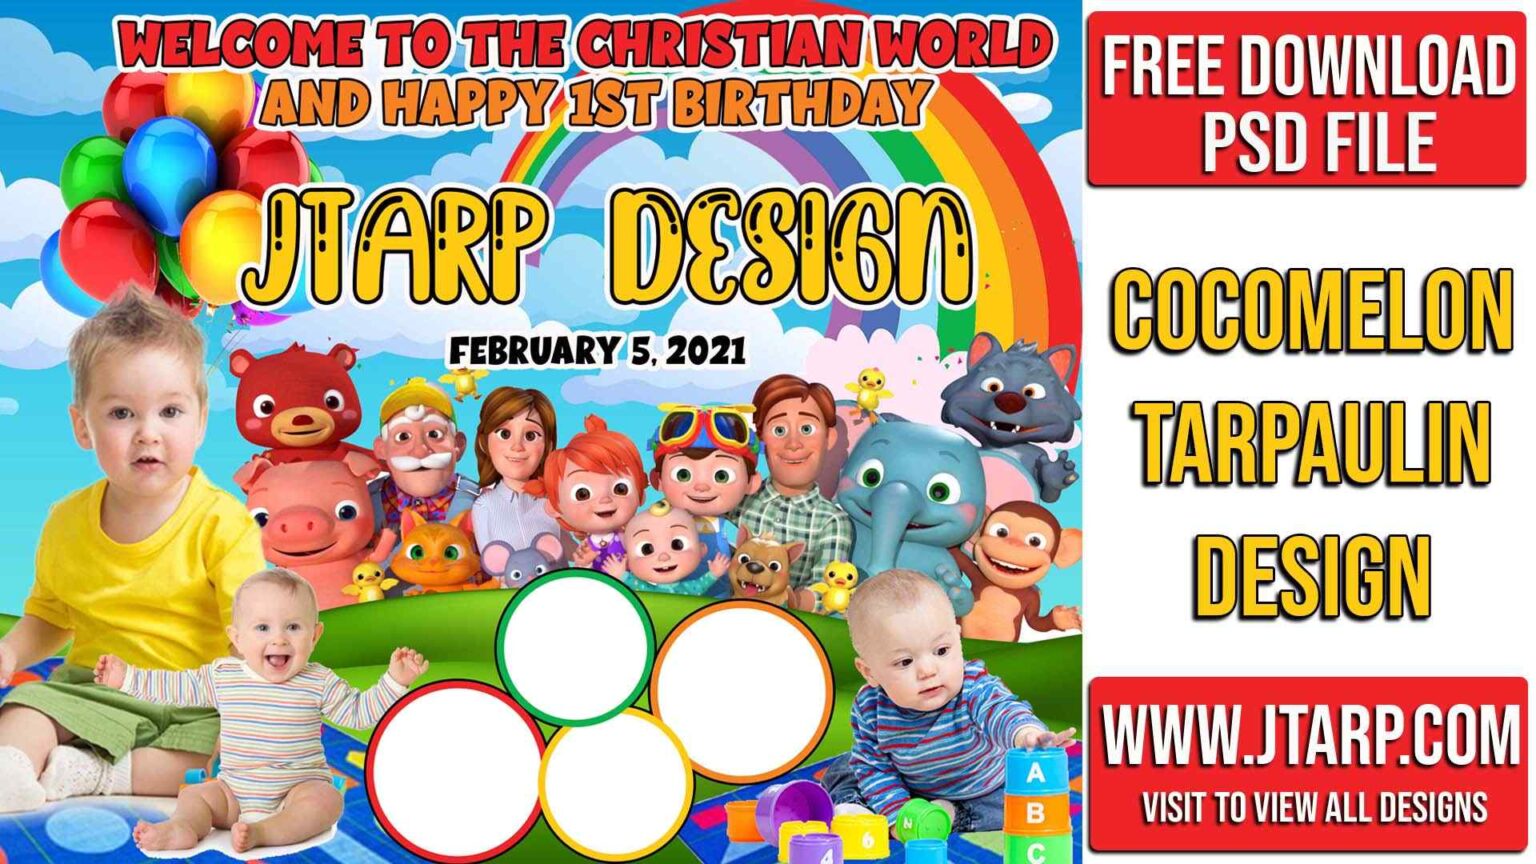 How to make Cocomelon Theme Tarpaulin Layout Design for Birthday and Christening: Photoshop Tutorial